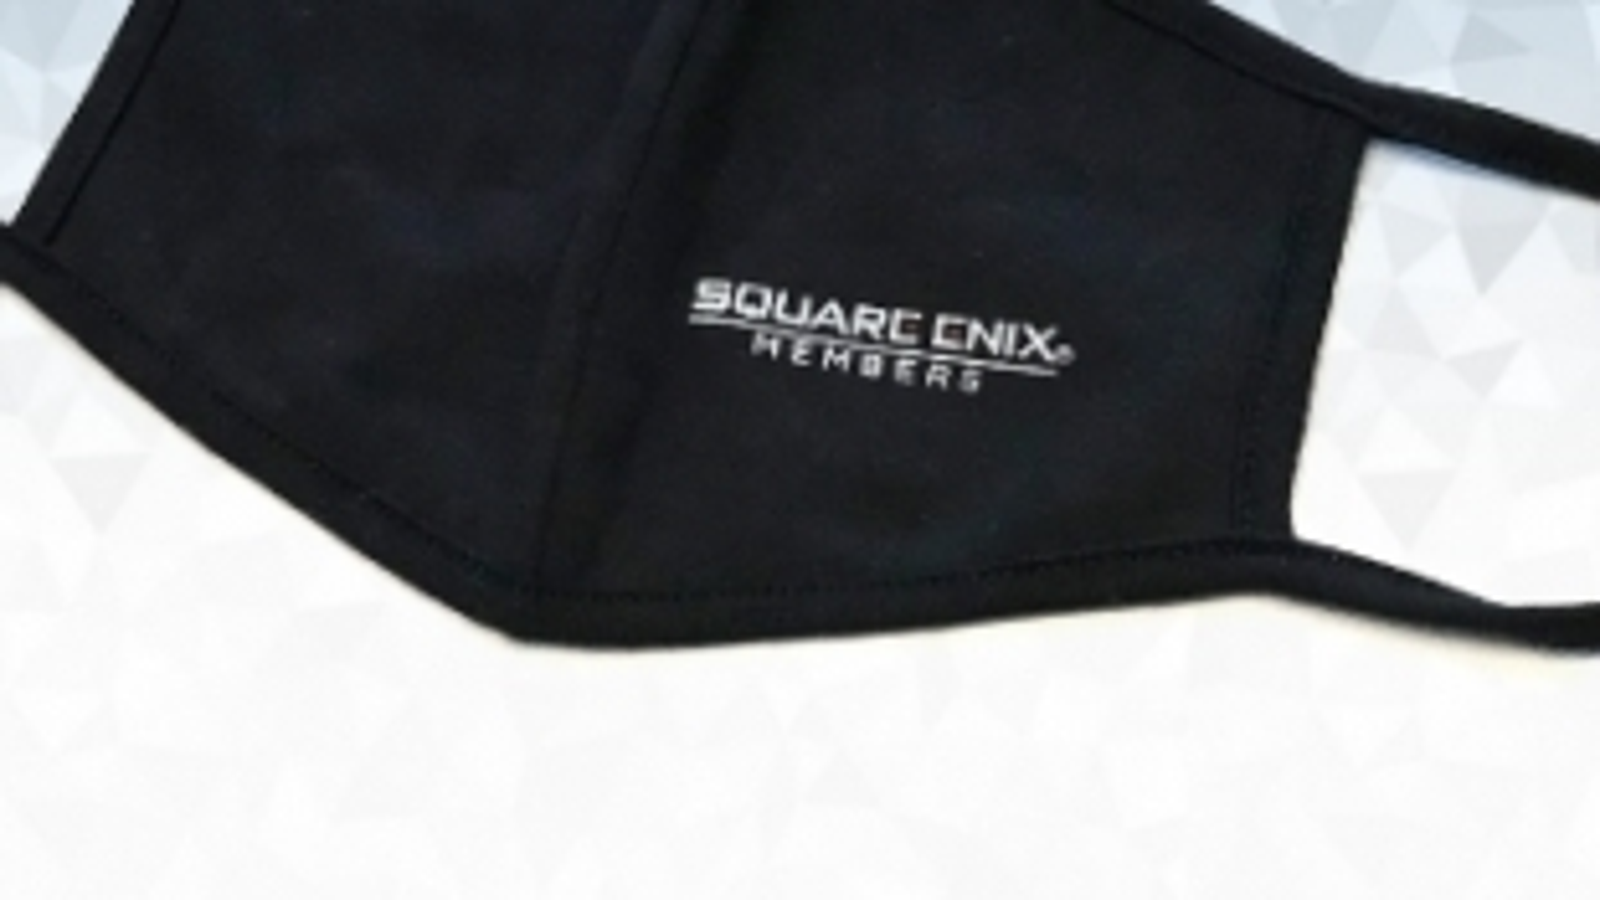 Guide: How to obtain Square Enix's free face mask when you spend $100